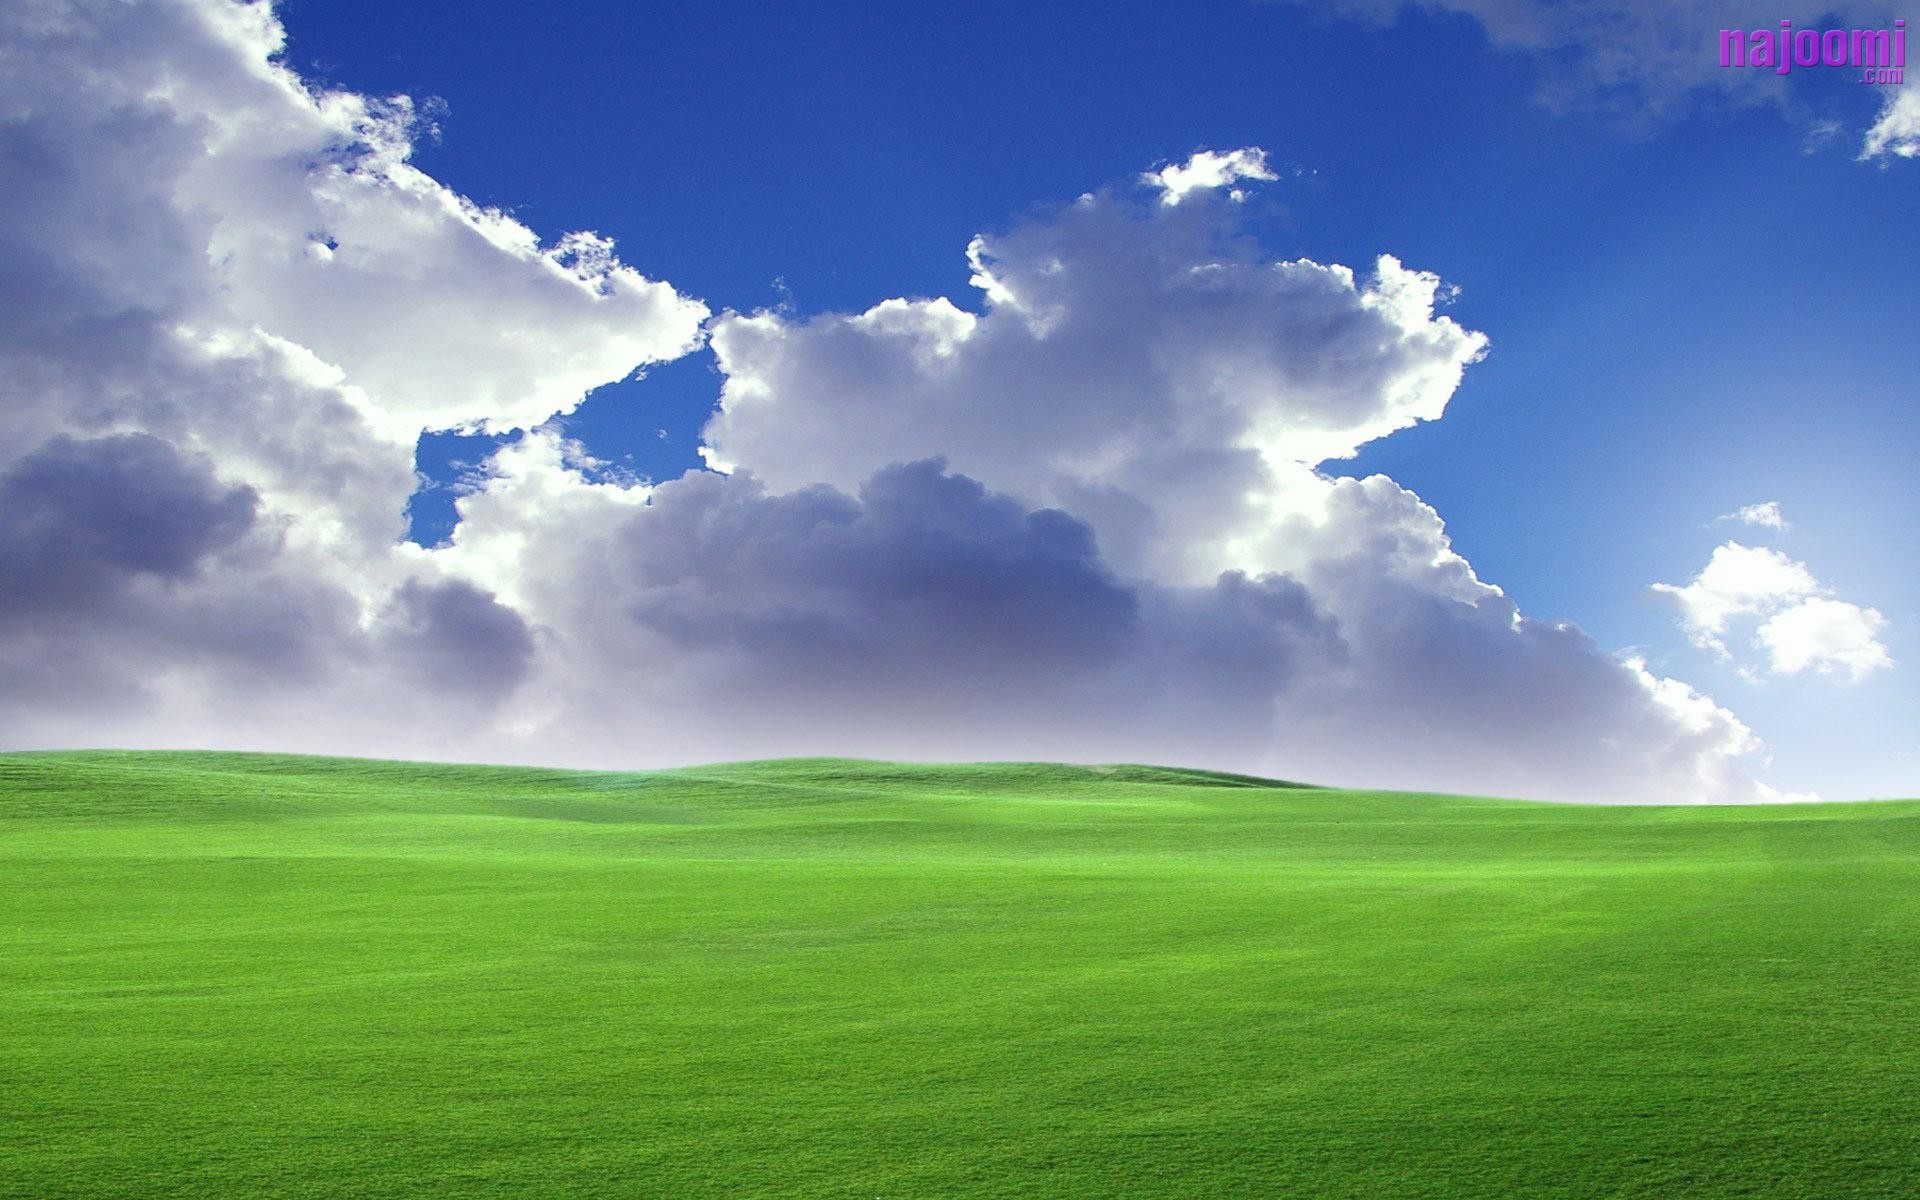  Windows  XP  wallpaper    Download free amazing backgrounds 